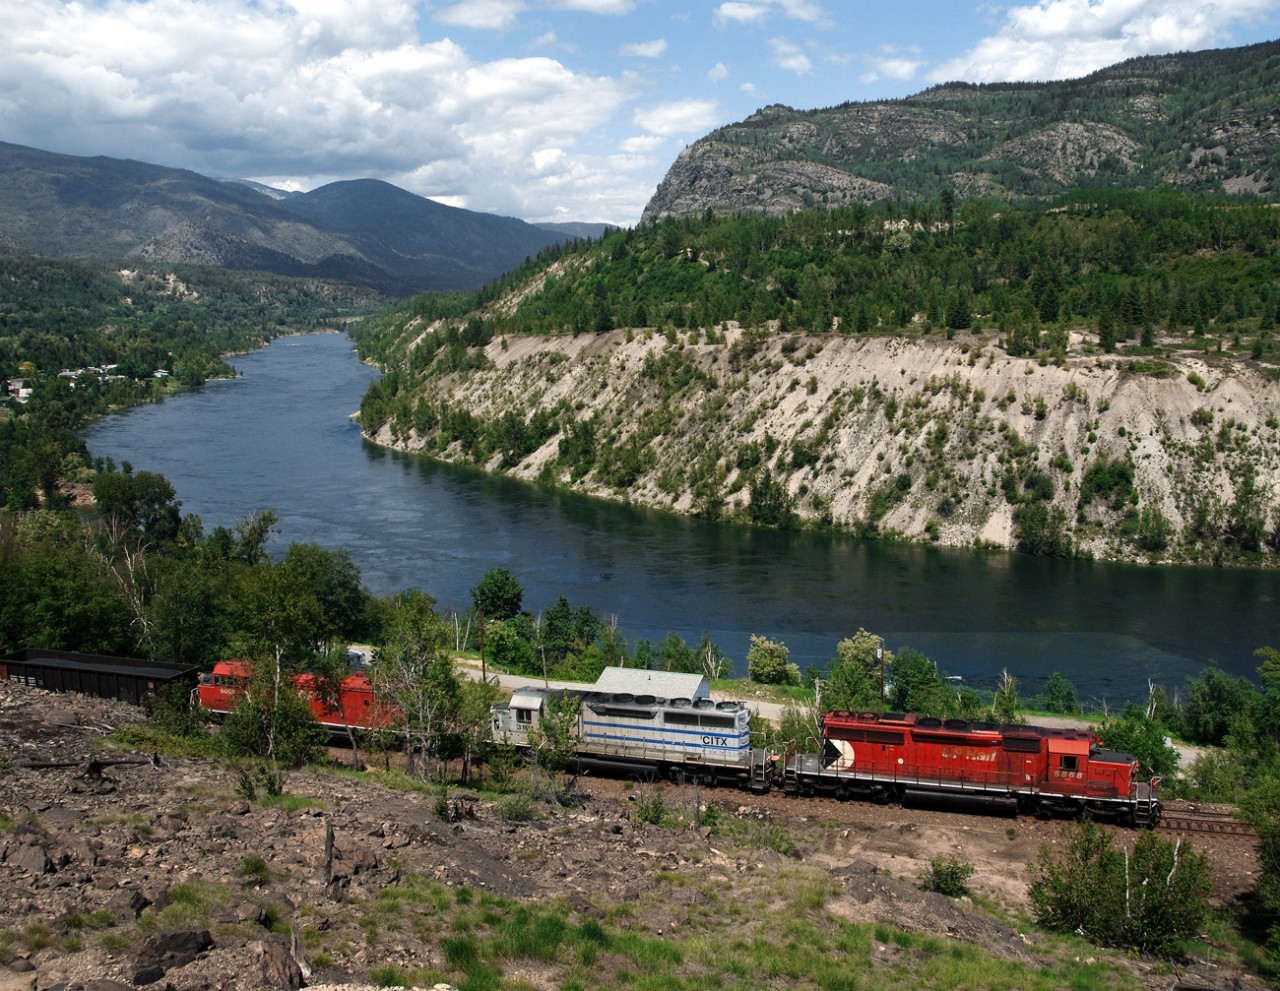 The westbound Trail freight approaches the Teck Cominco lead zinc Smelter on the Columbia River in the West Kootenay region of BC